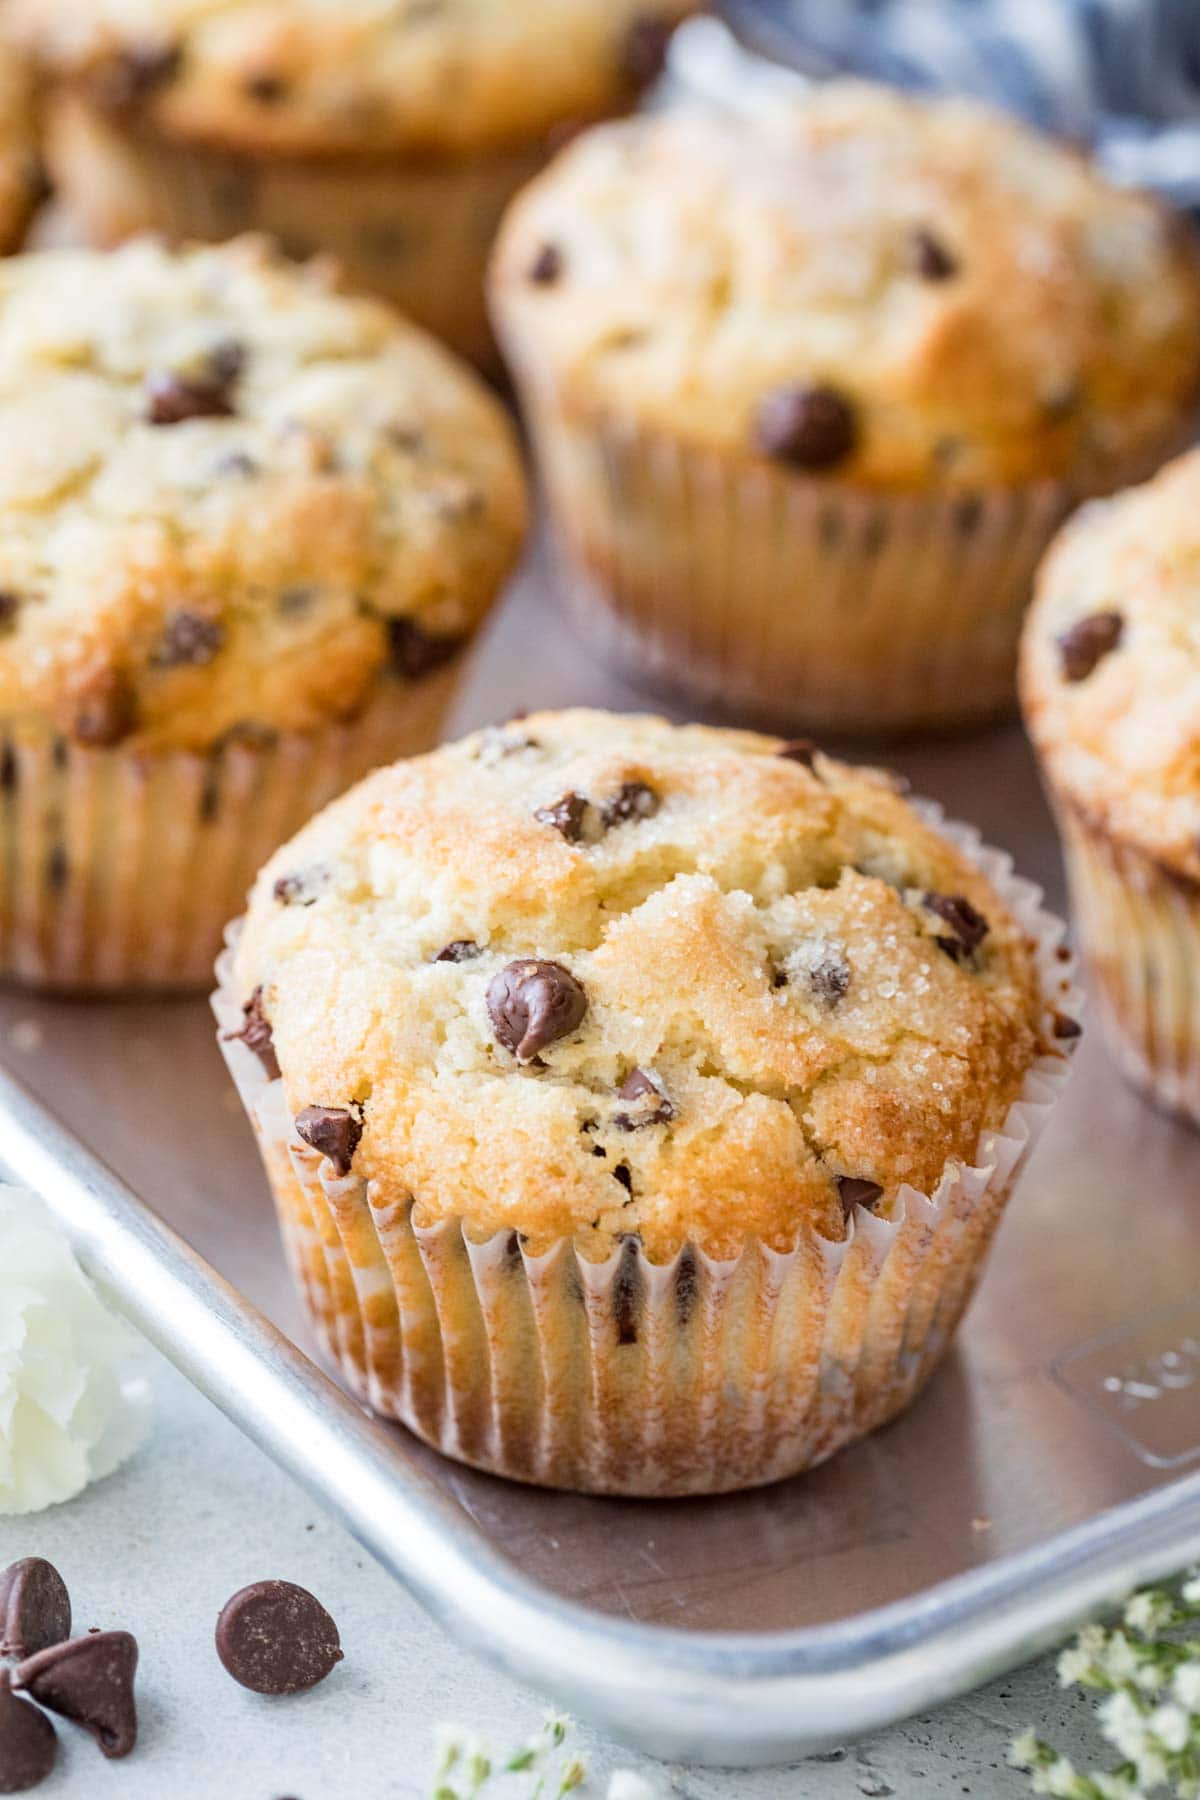 large, golden brown chocolate chip muffins with sugared tops resting on a cookie sheet